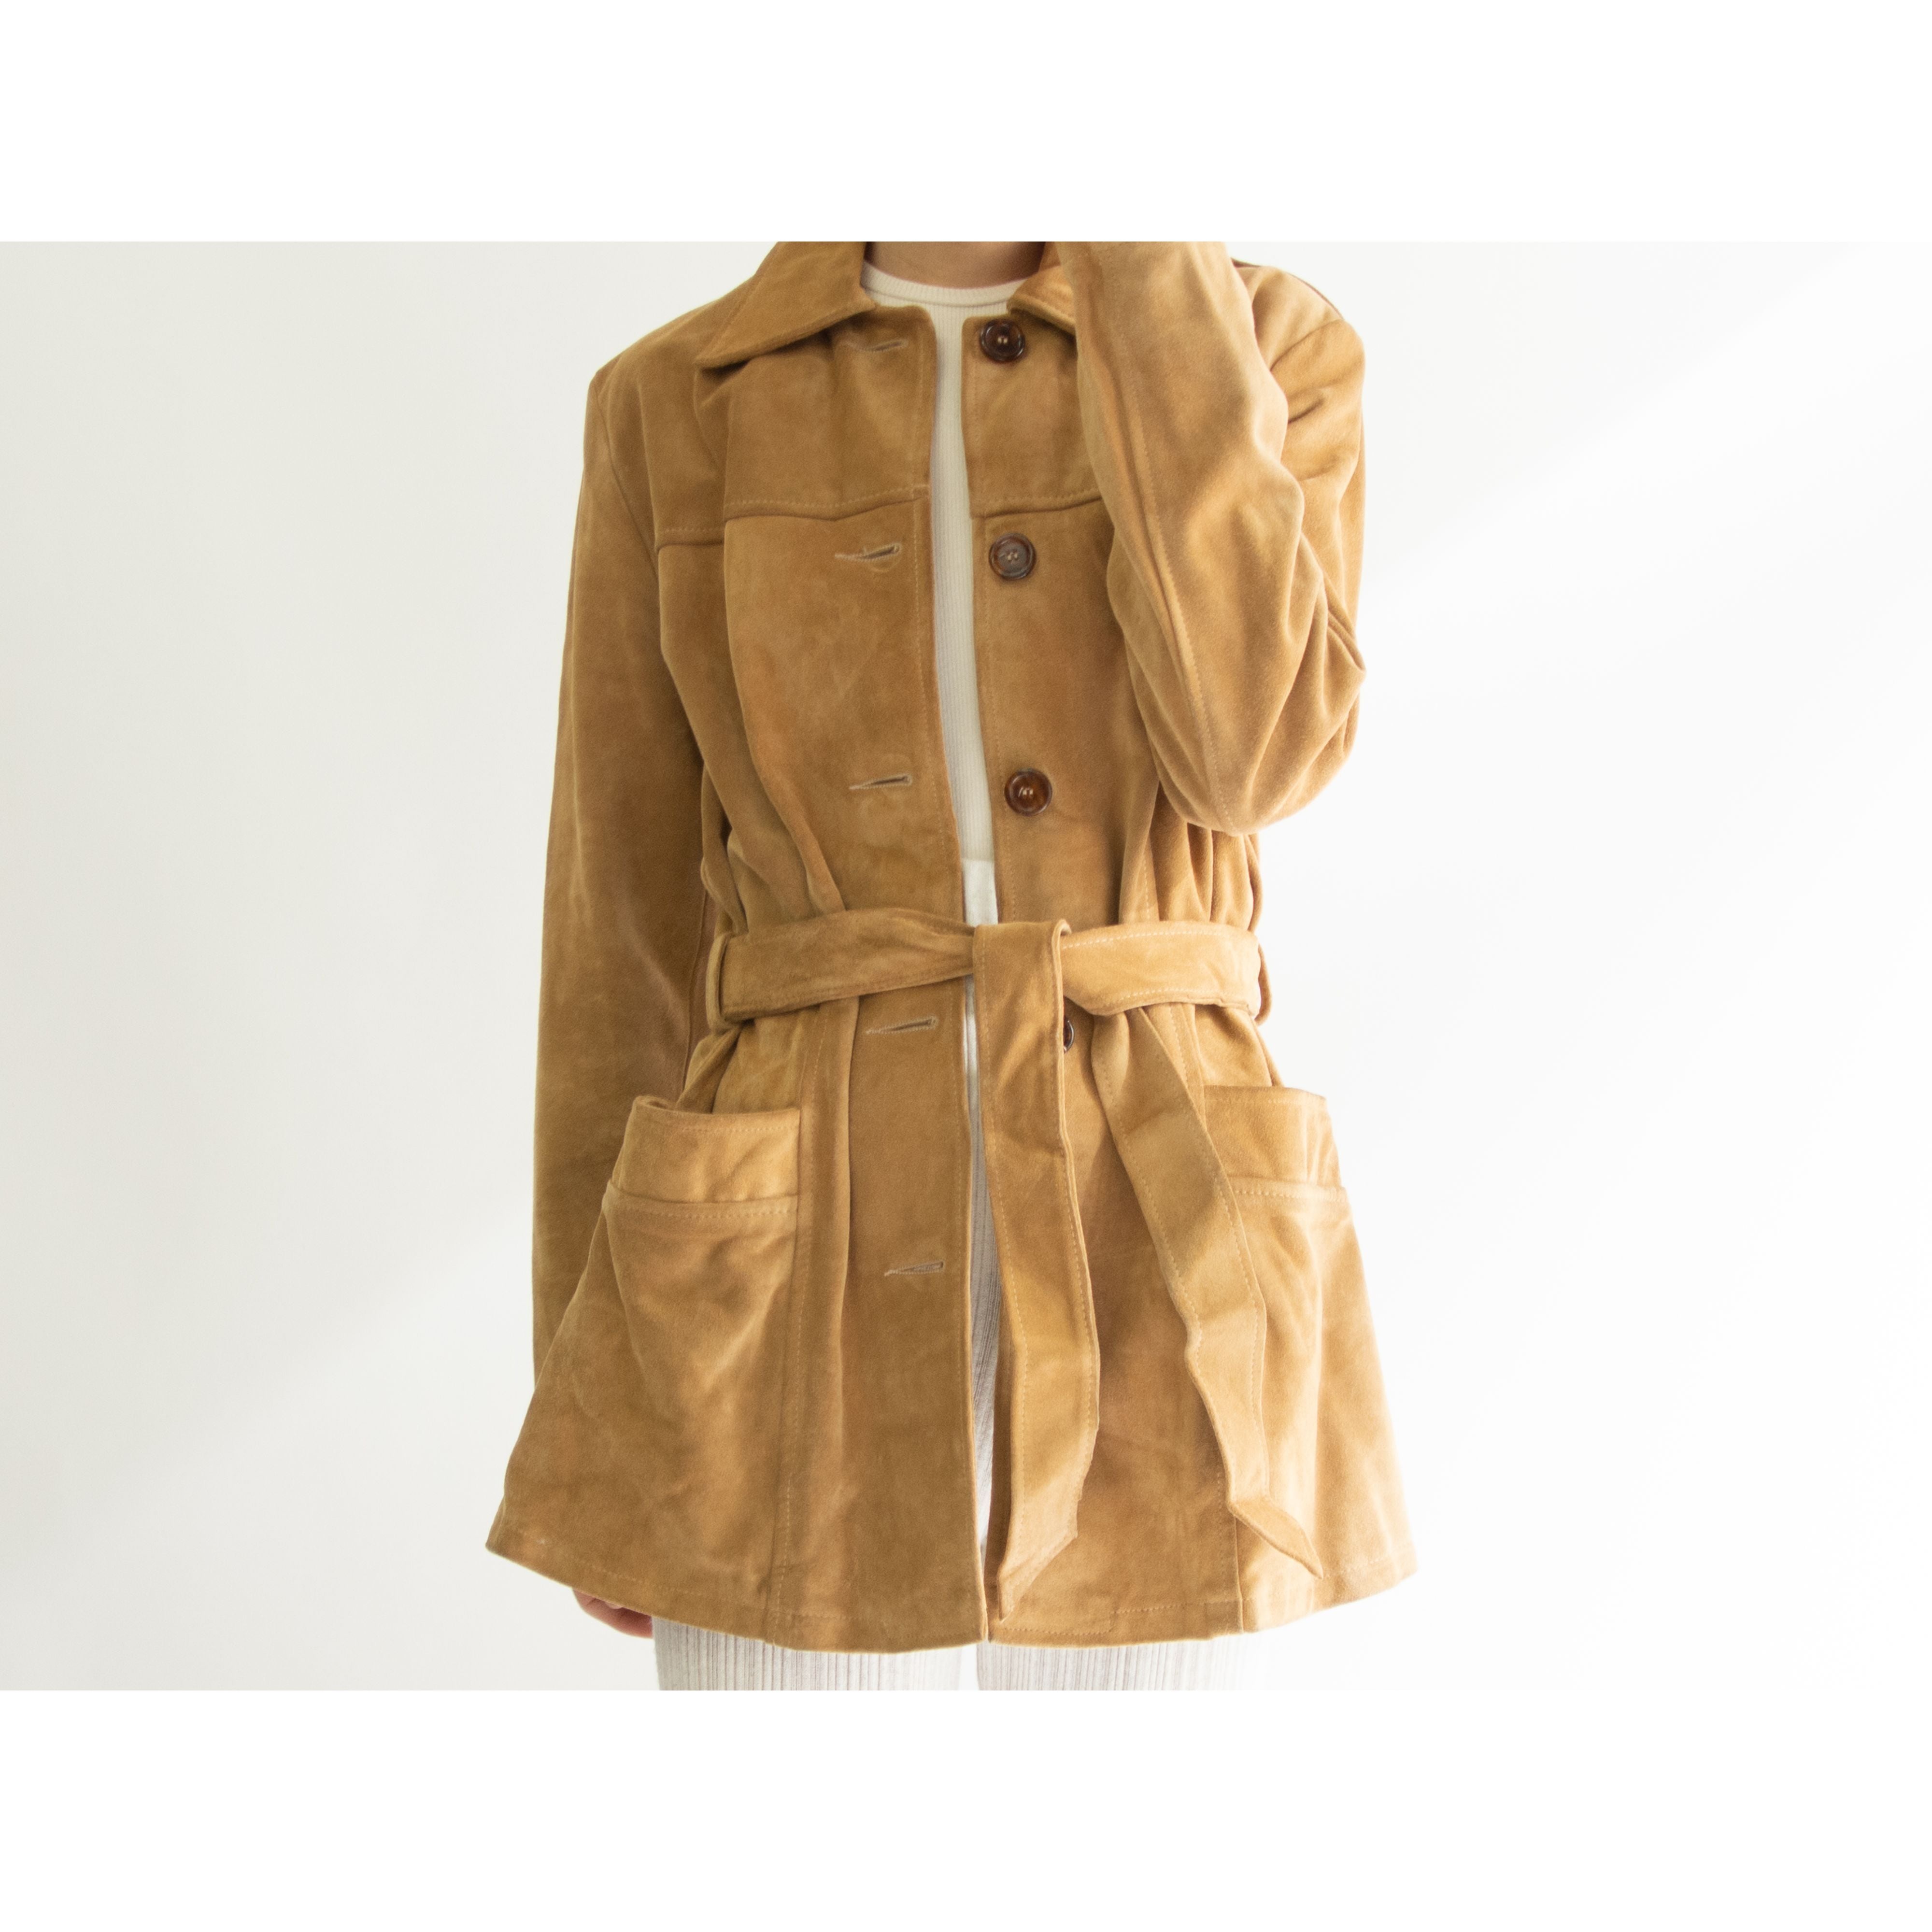 KOOKAI】Made in France Suede Leather Belted Jacket（クーカイ